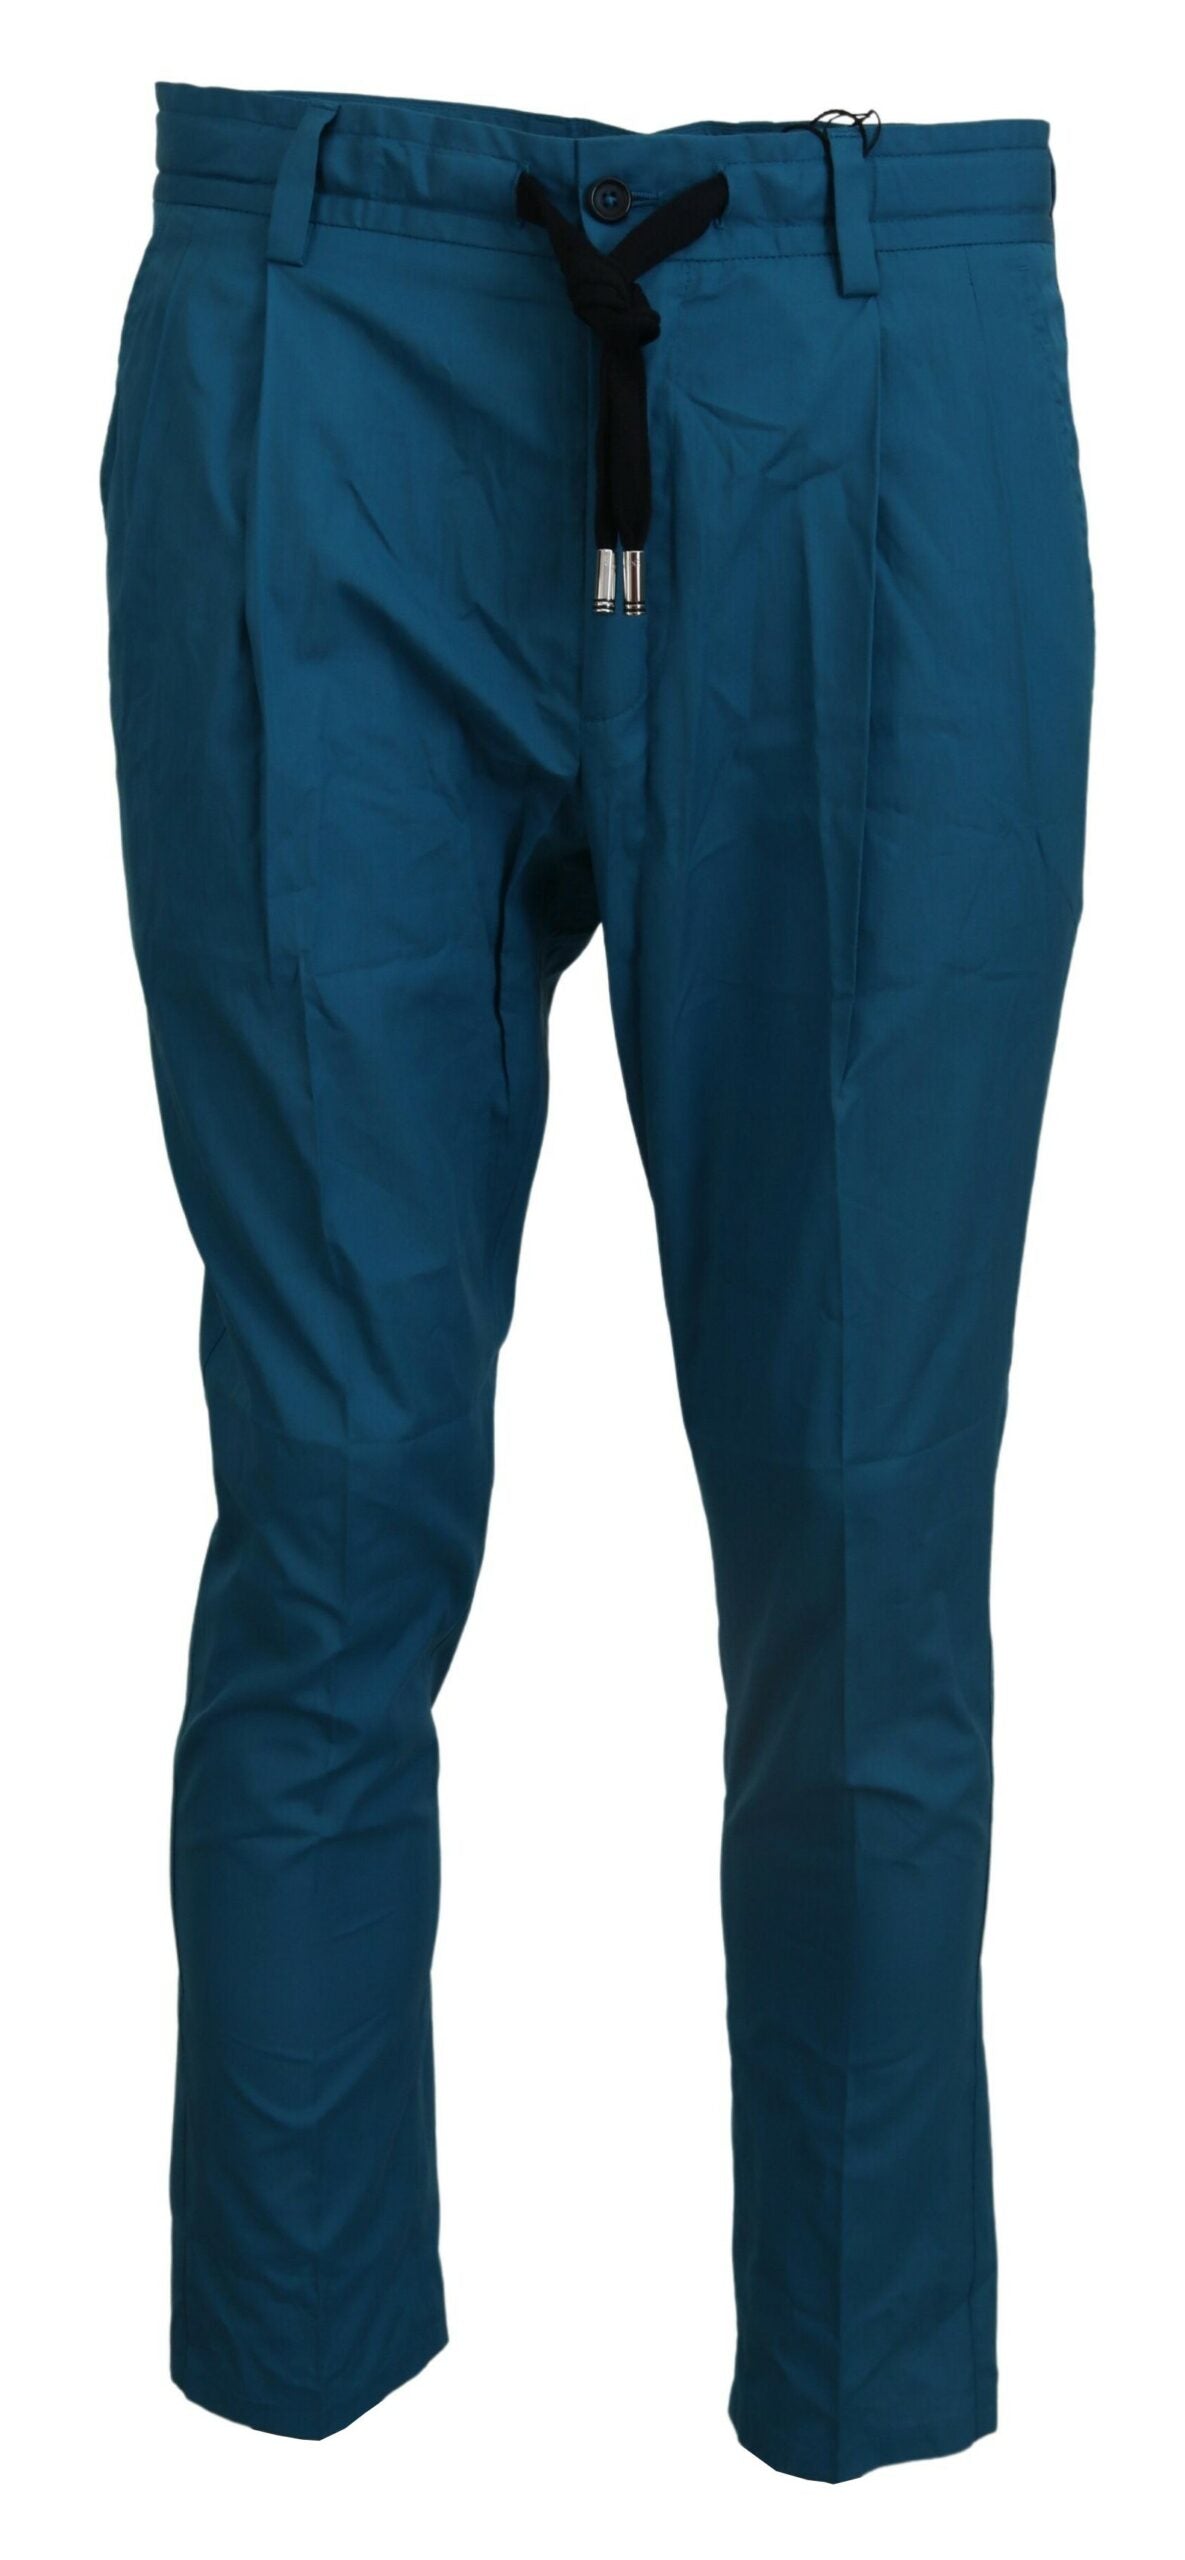 Casual Blue Chinos Trousers Pants